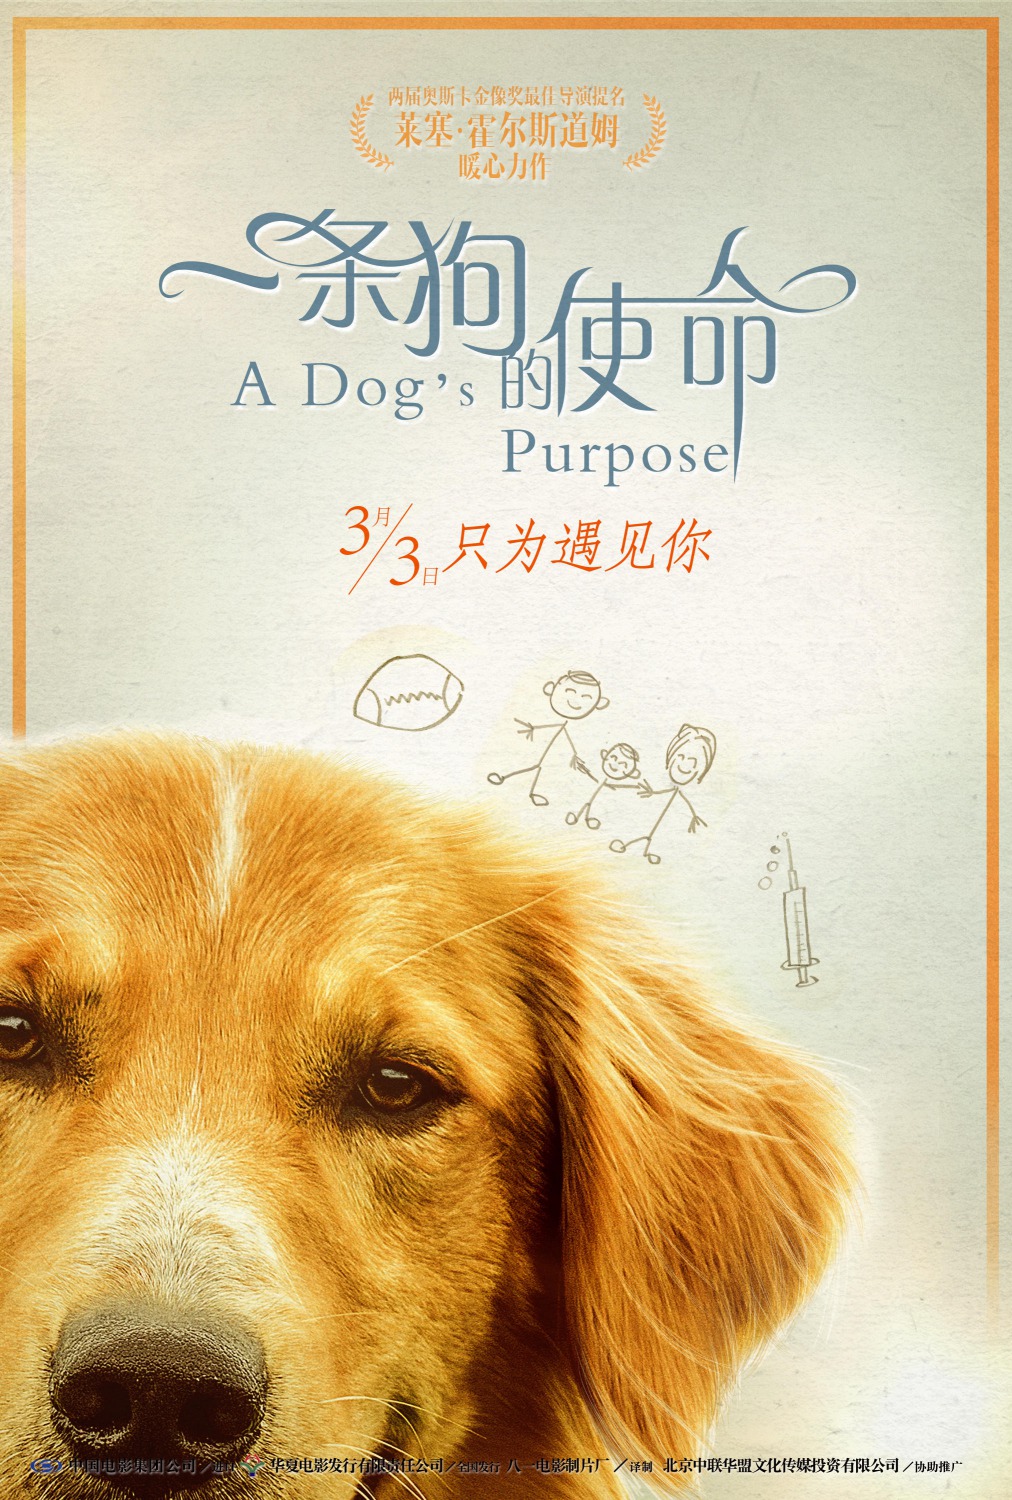 Extra Large Movie Poster Image for A Dog's Purpose (#10 of 13)